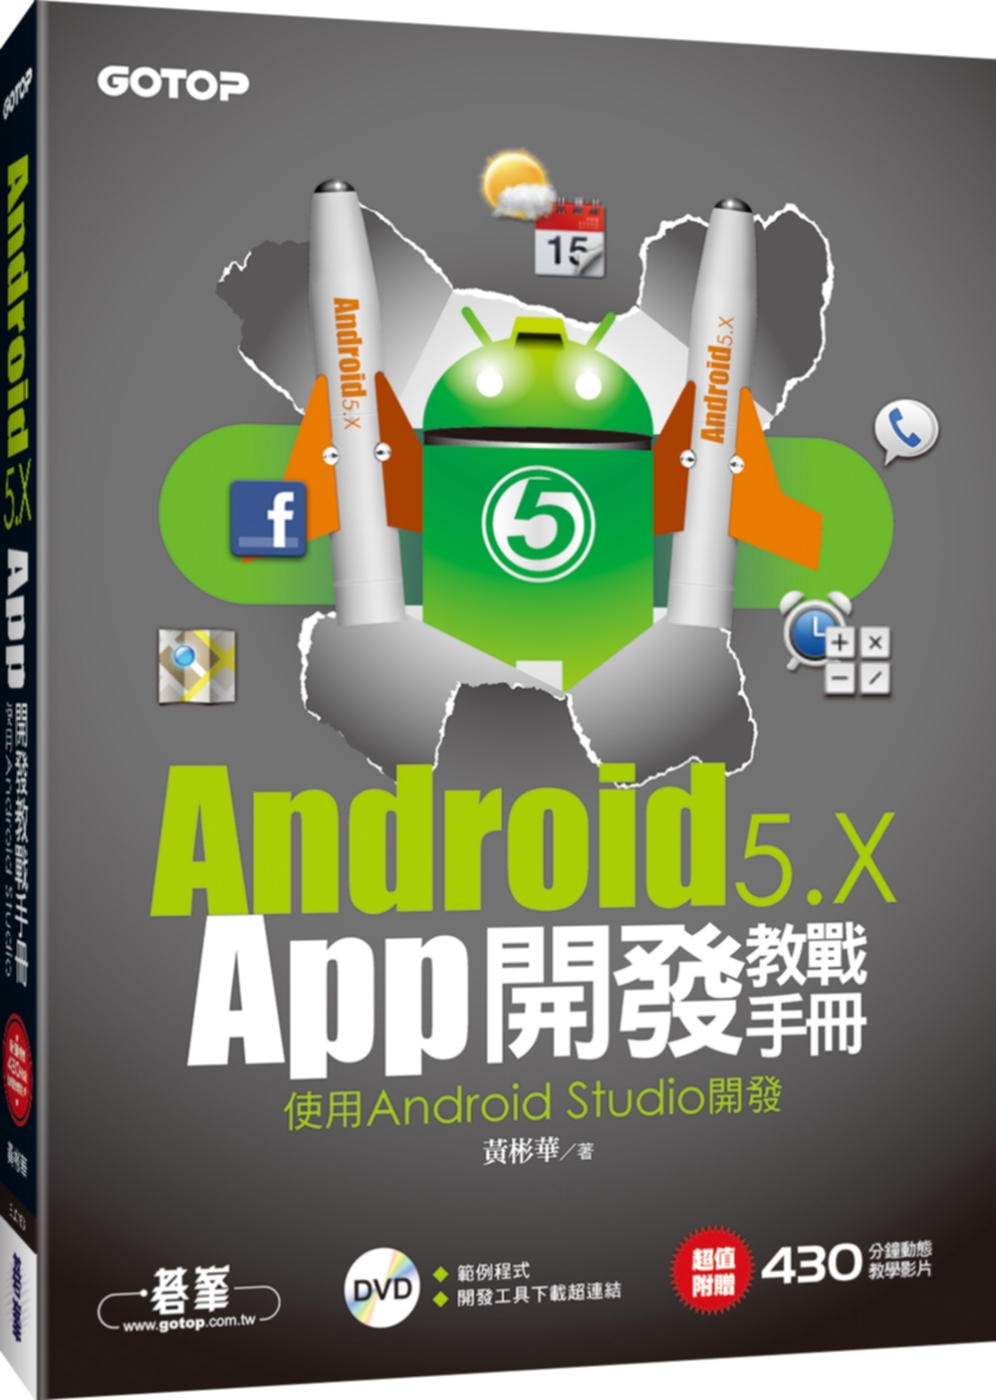 Android 5.x App開發教戰手冊：使用Androi...